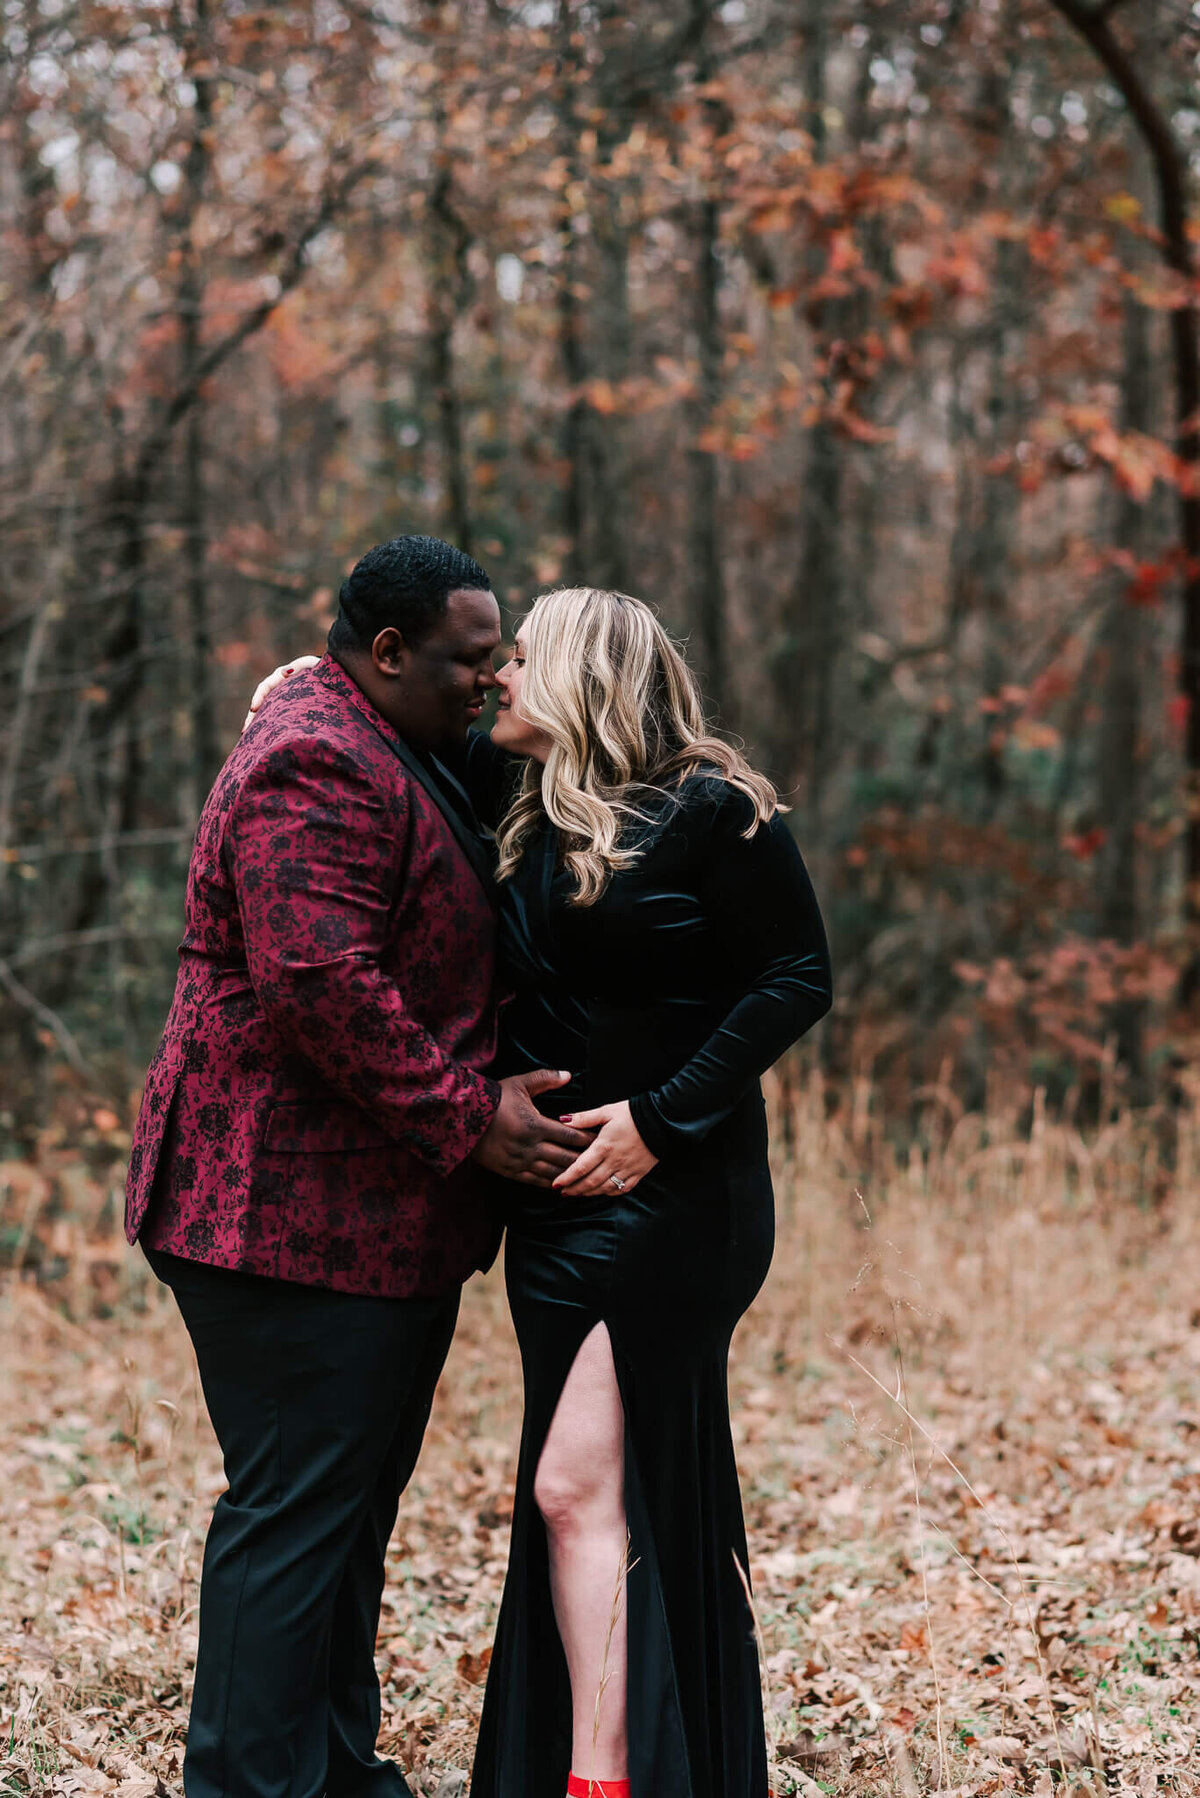 An intimate moment during their maternity photos caught by Denise Van, a Northern Virginia maternity photographer